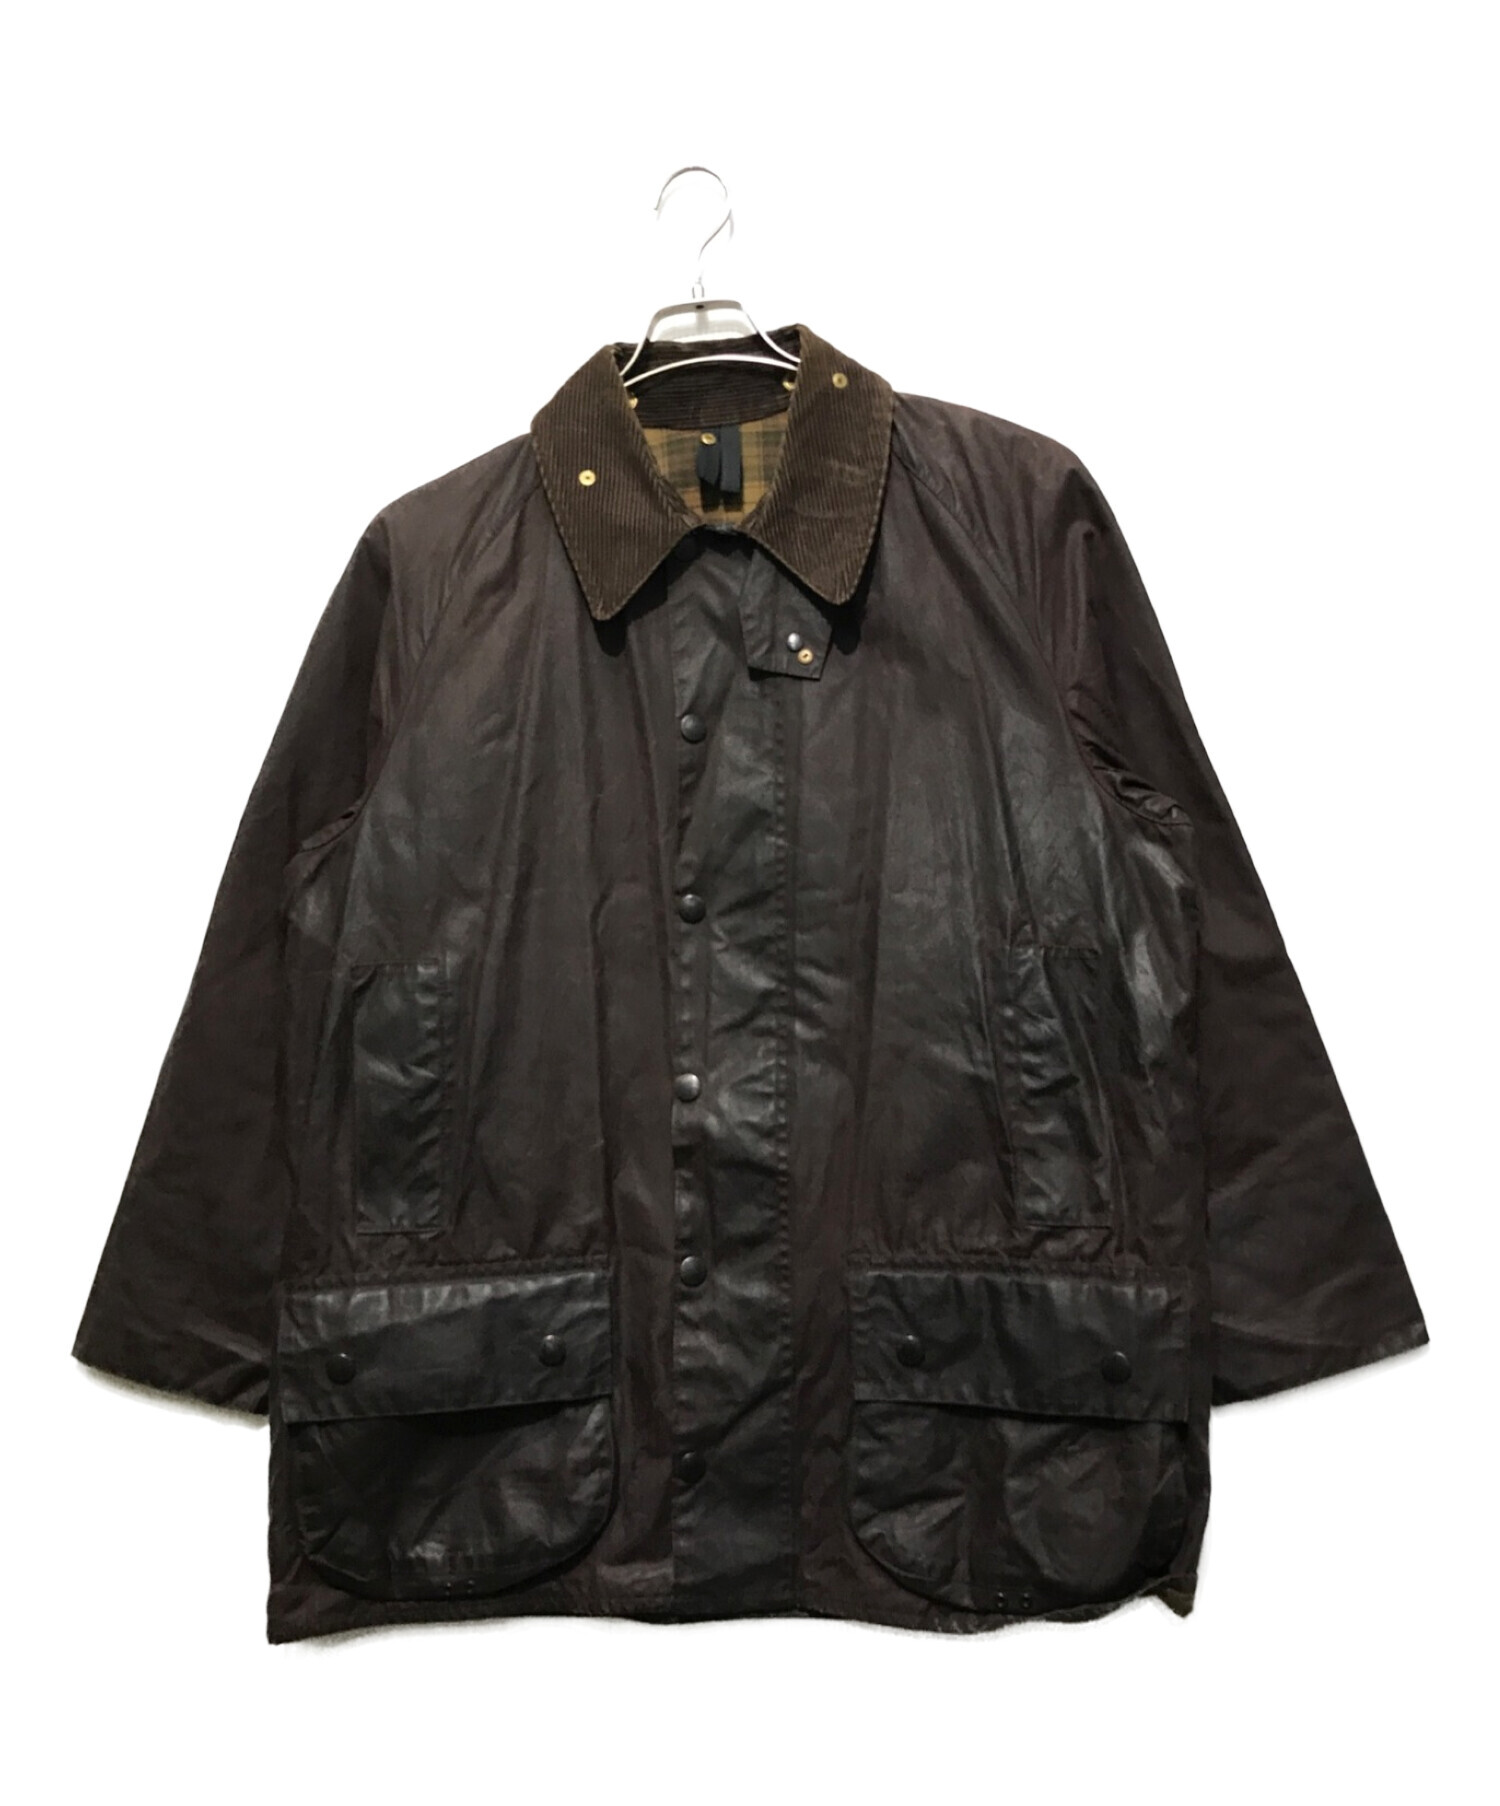 UNITED ARROWS & SONS ×Barbour サイズ42 - ブルゾン